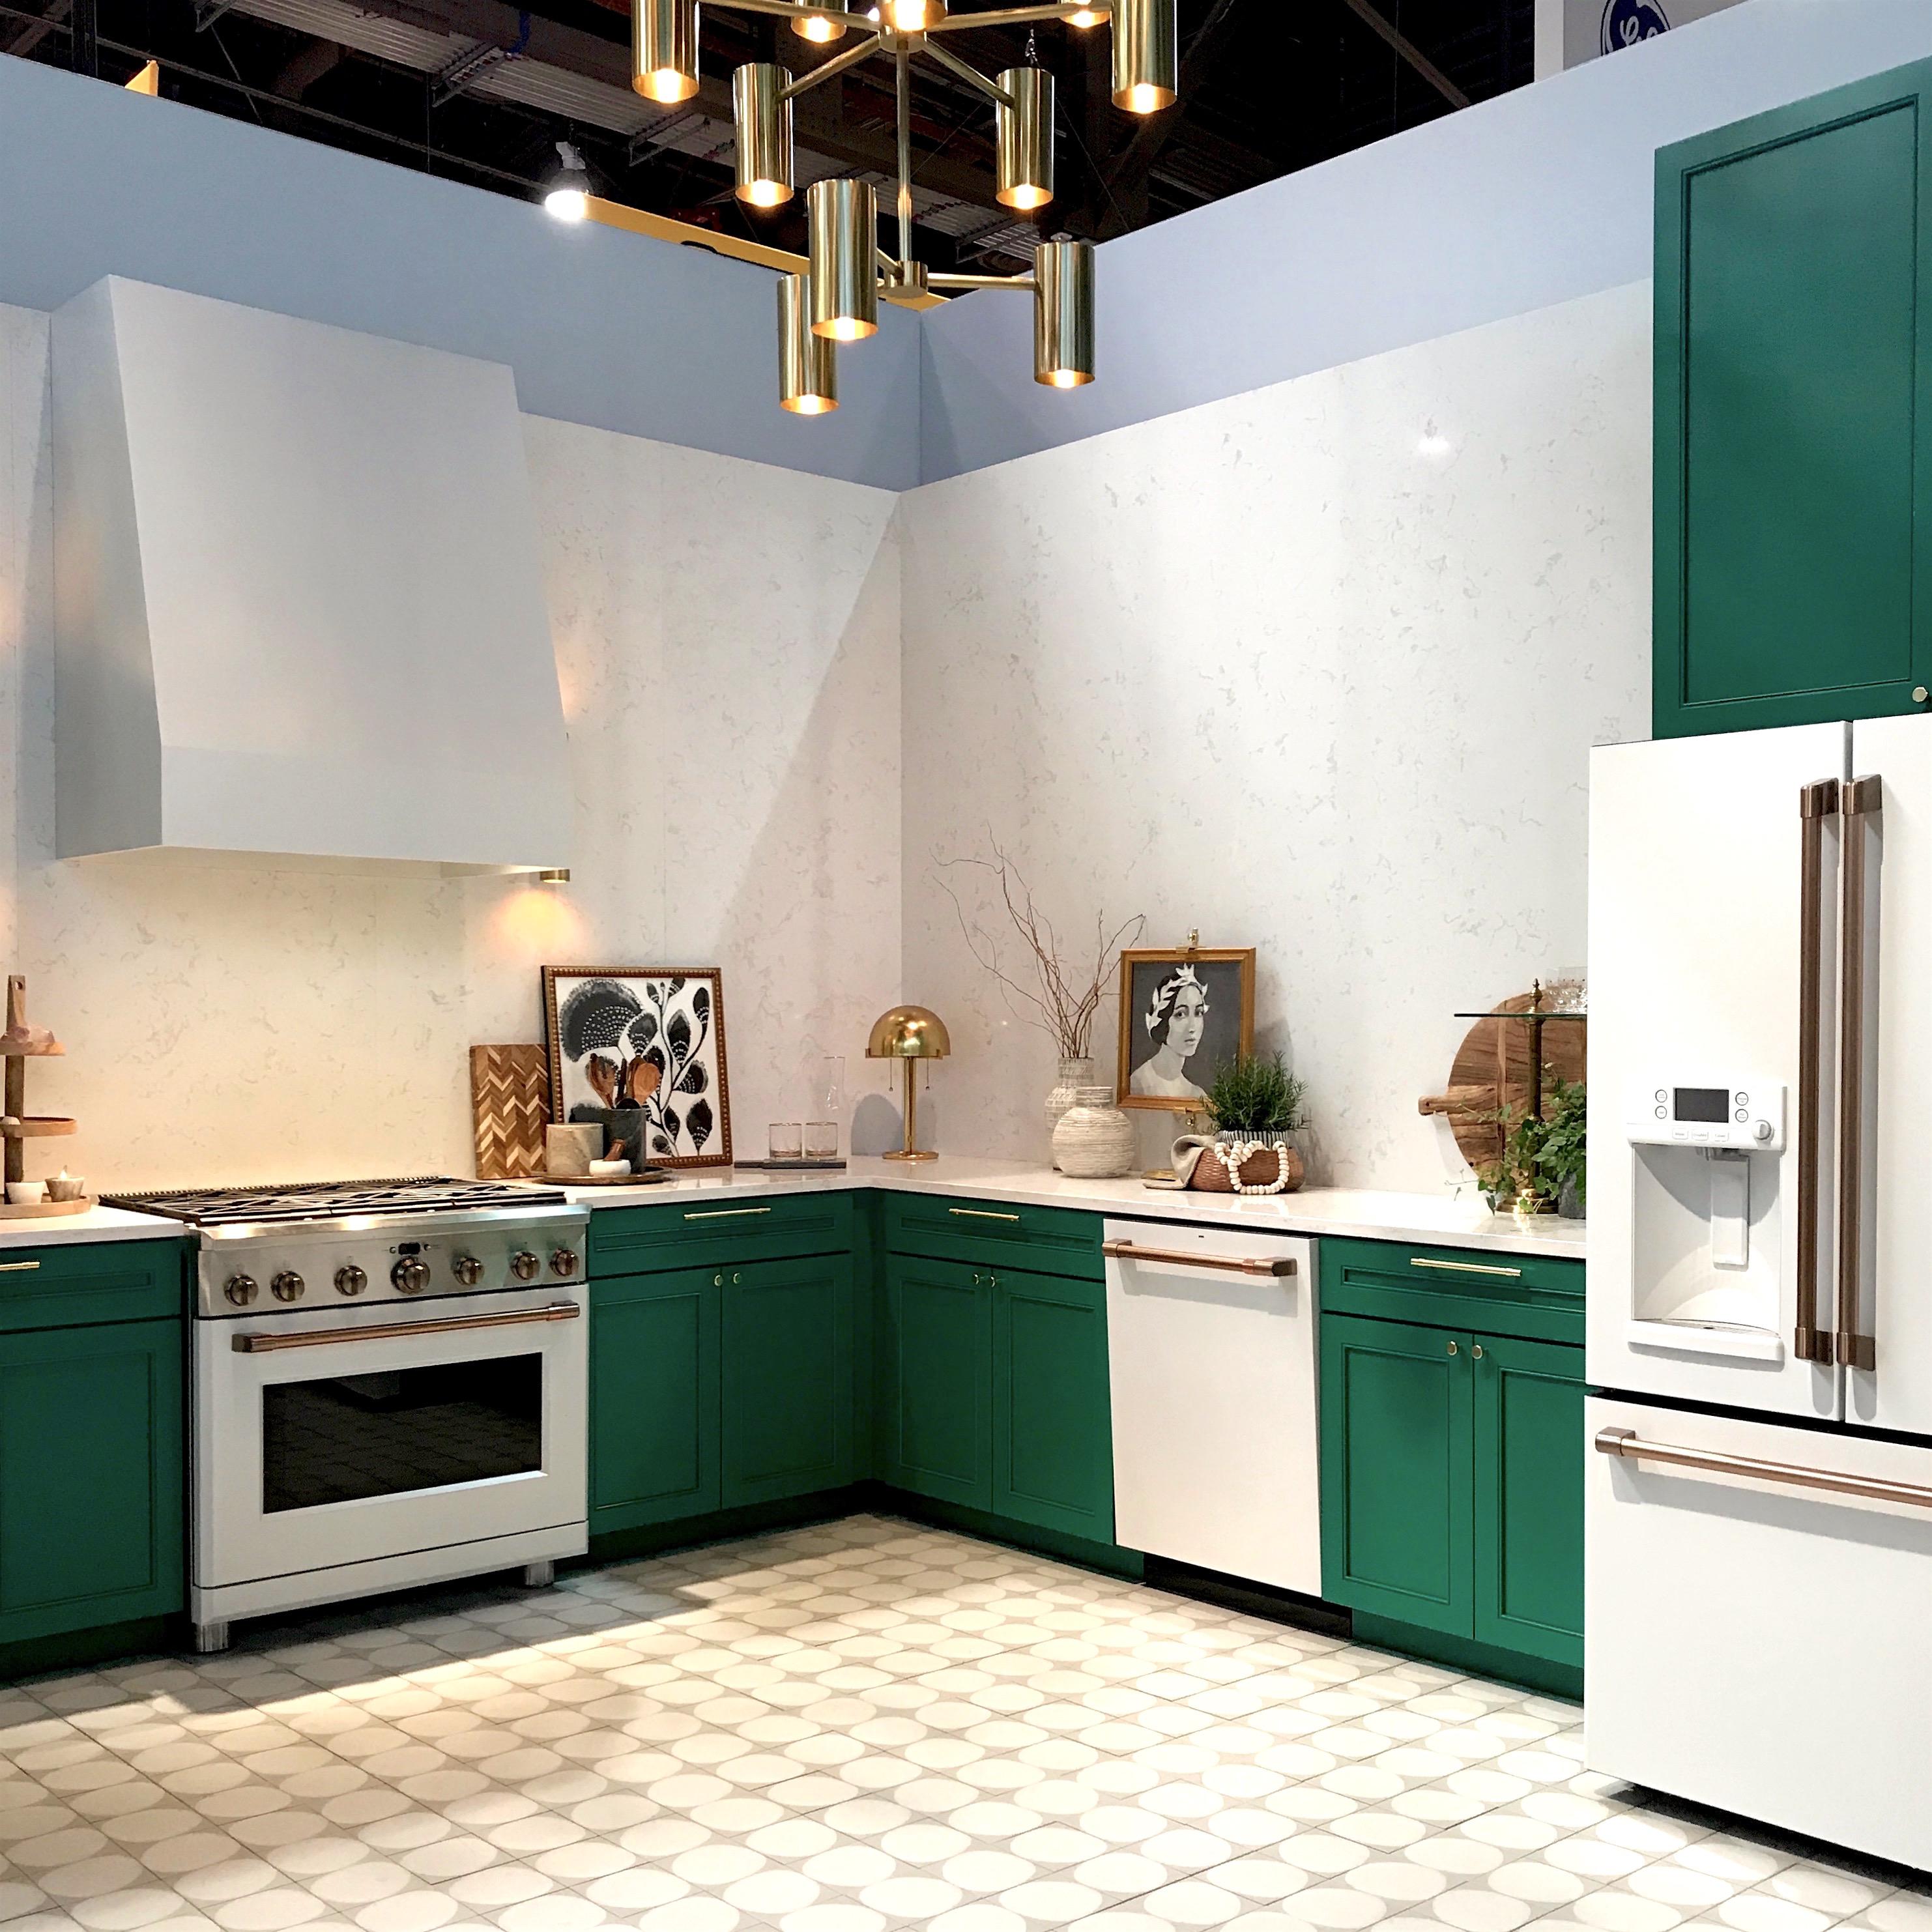 ge-cafe-white-matte-appliances-kitchen-and-bath-industry-show